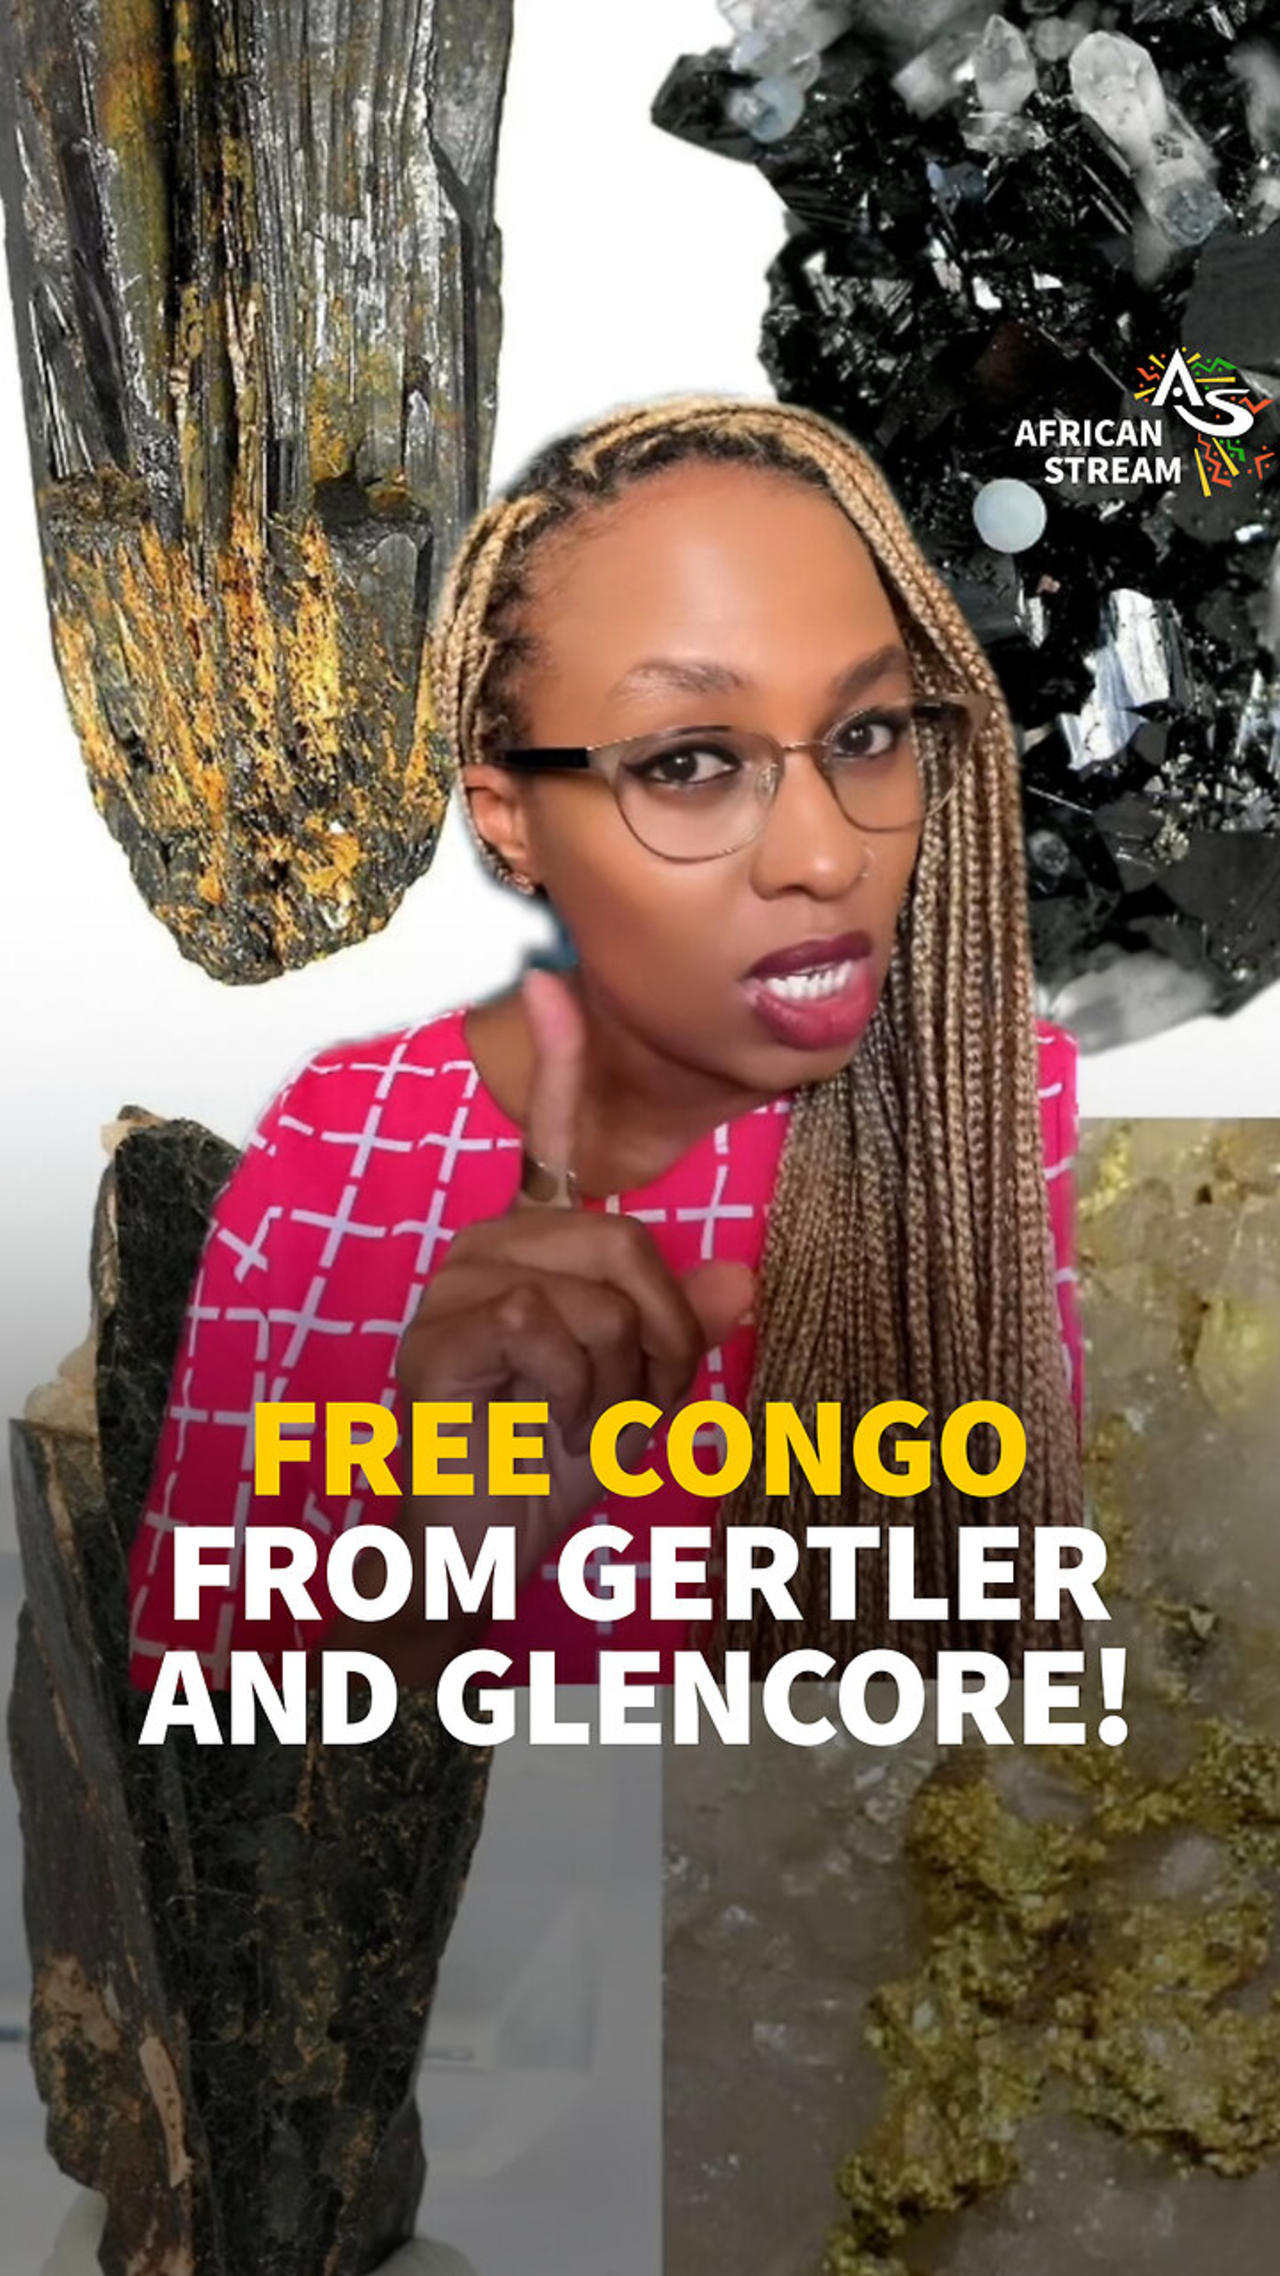 FREE CONGO FROM GERTLER AND GLENCORE!